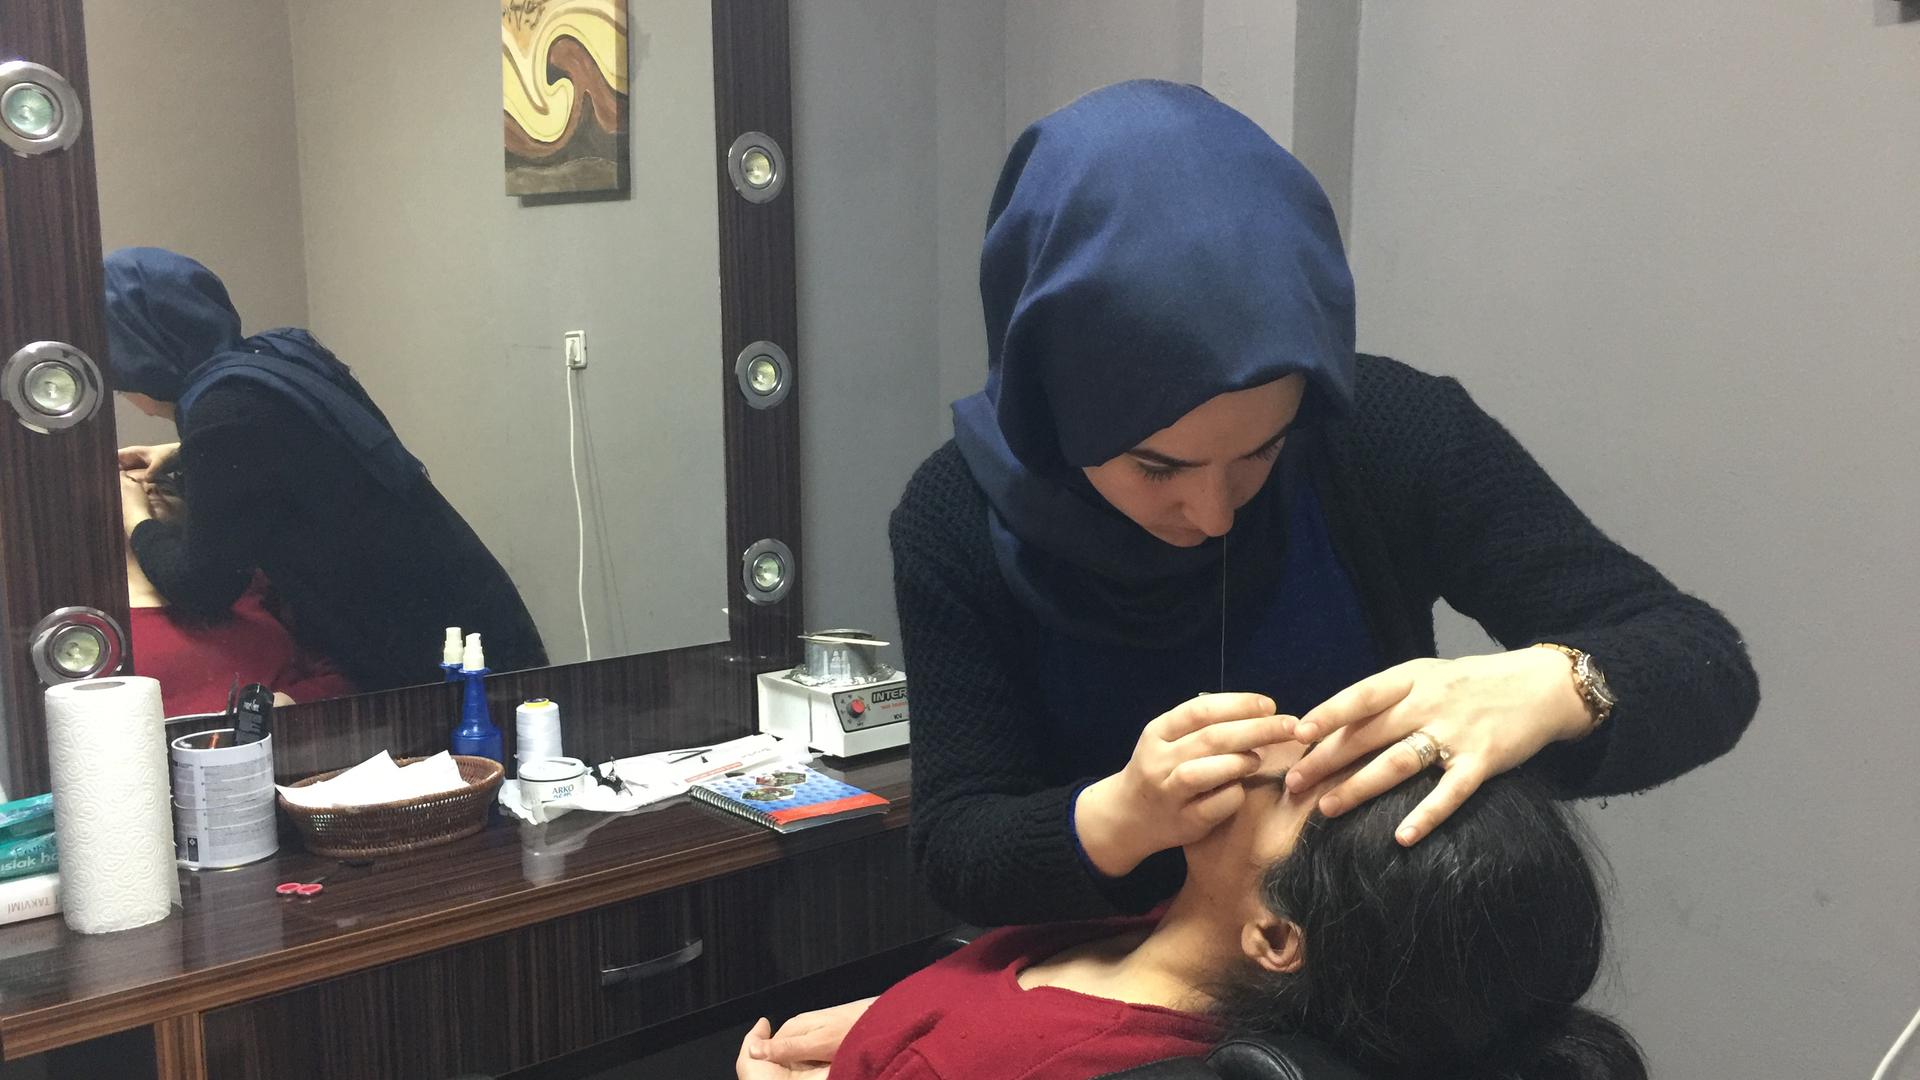 Elif Koc, 18, shapes a customer's eyebrows at the Twins salon in Istanbul. Kroc is voting yes on Sunday's referendum. But she says the issue is dividing her family.